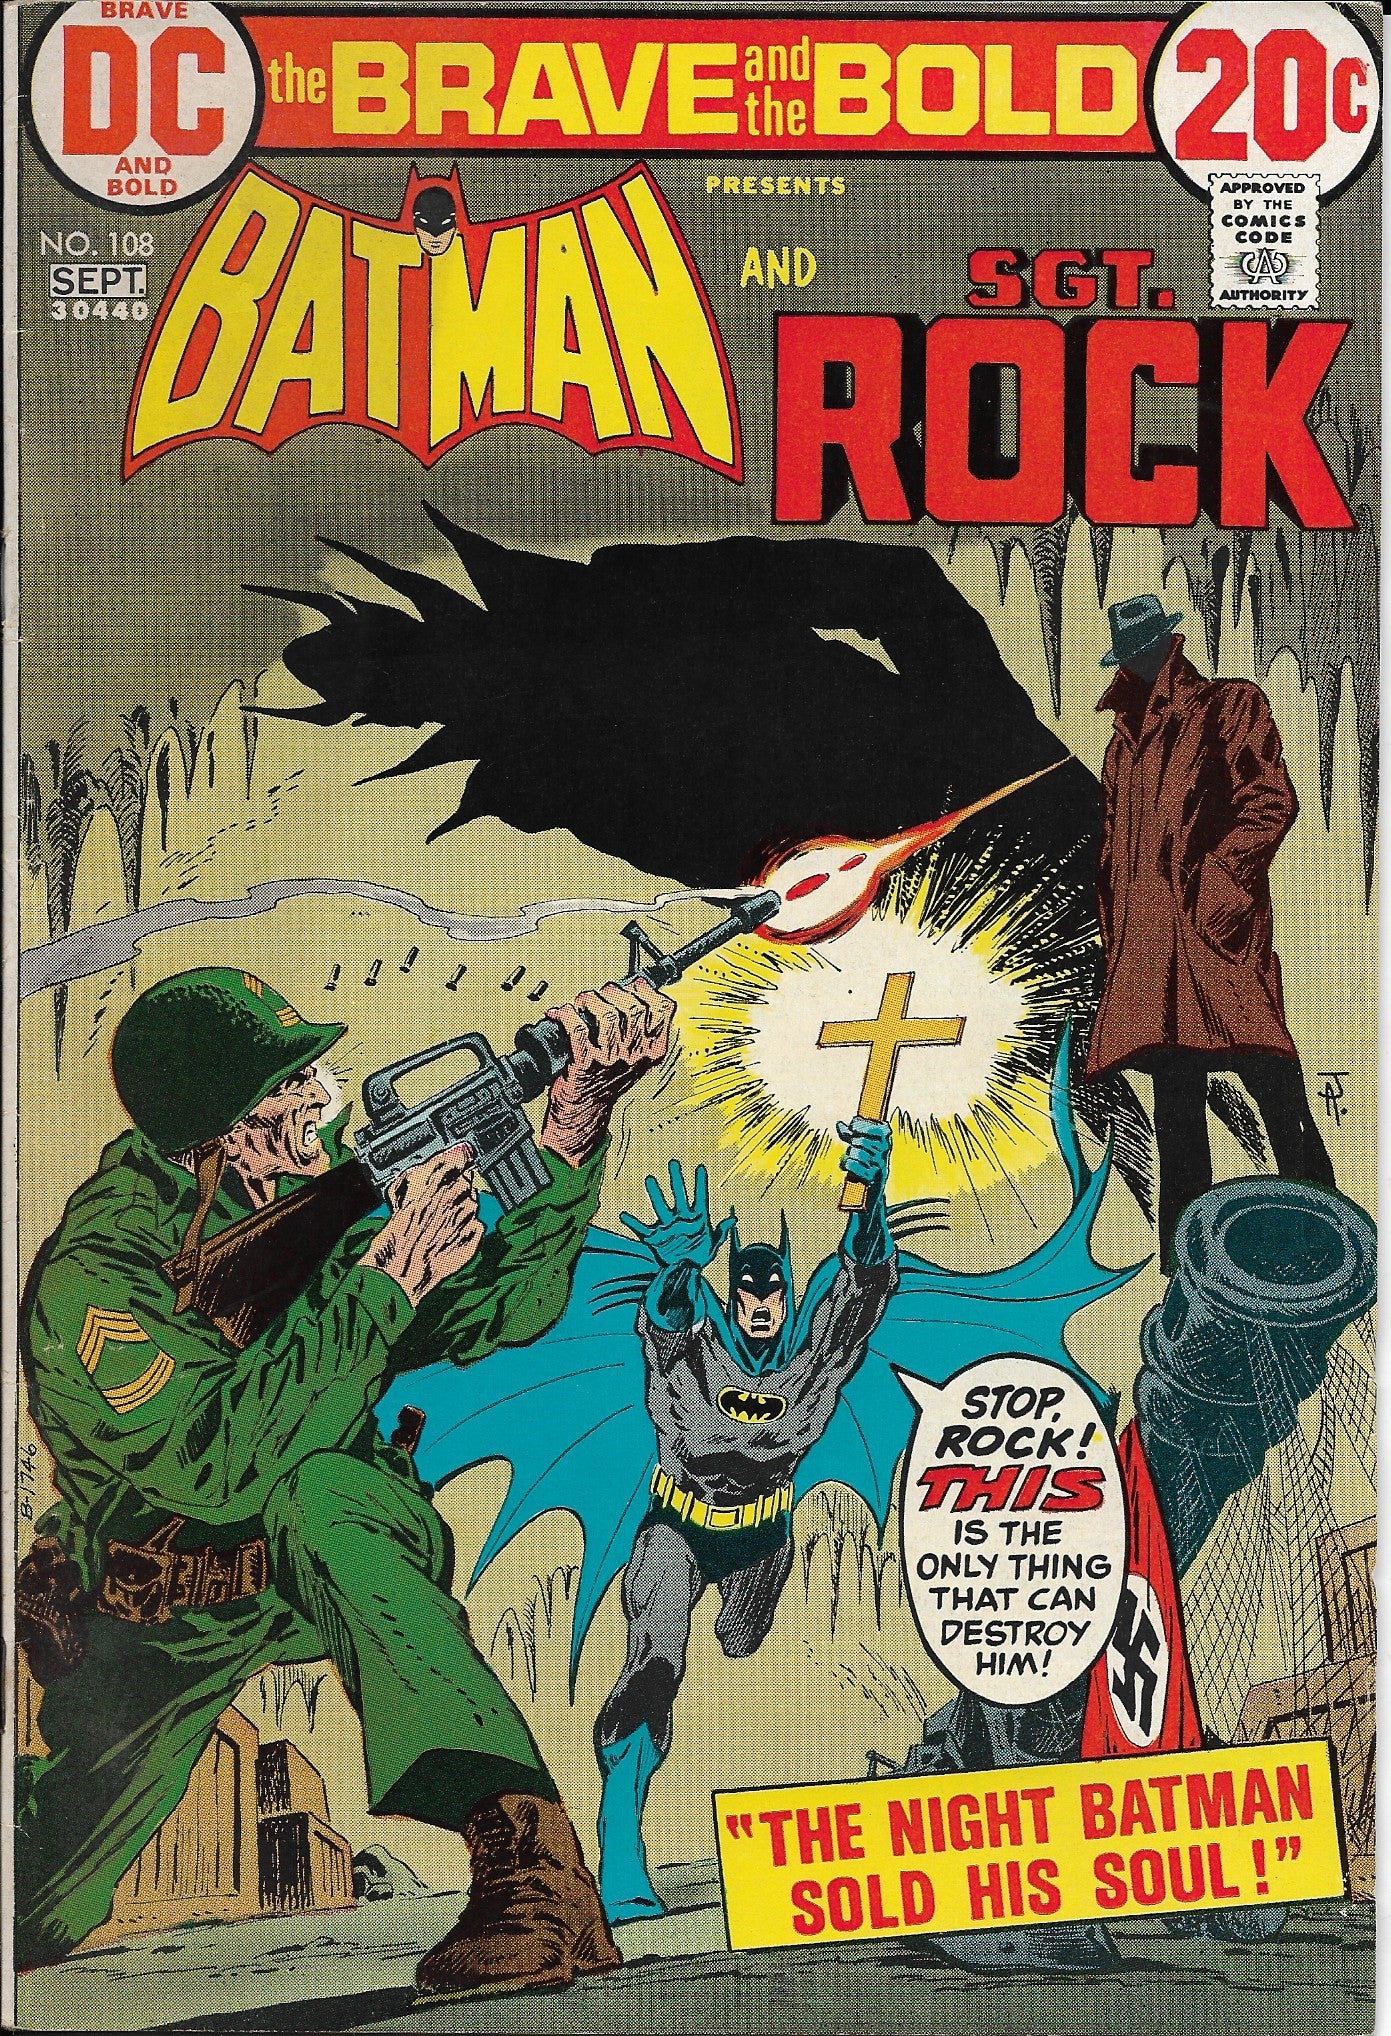 The Brave and the Bold No. 108, Featuring Batman & Sgt. Rock, DC Comics, September 1973